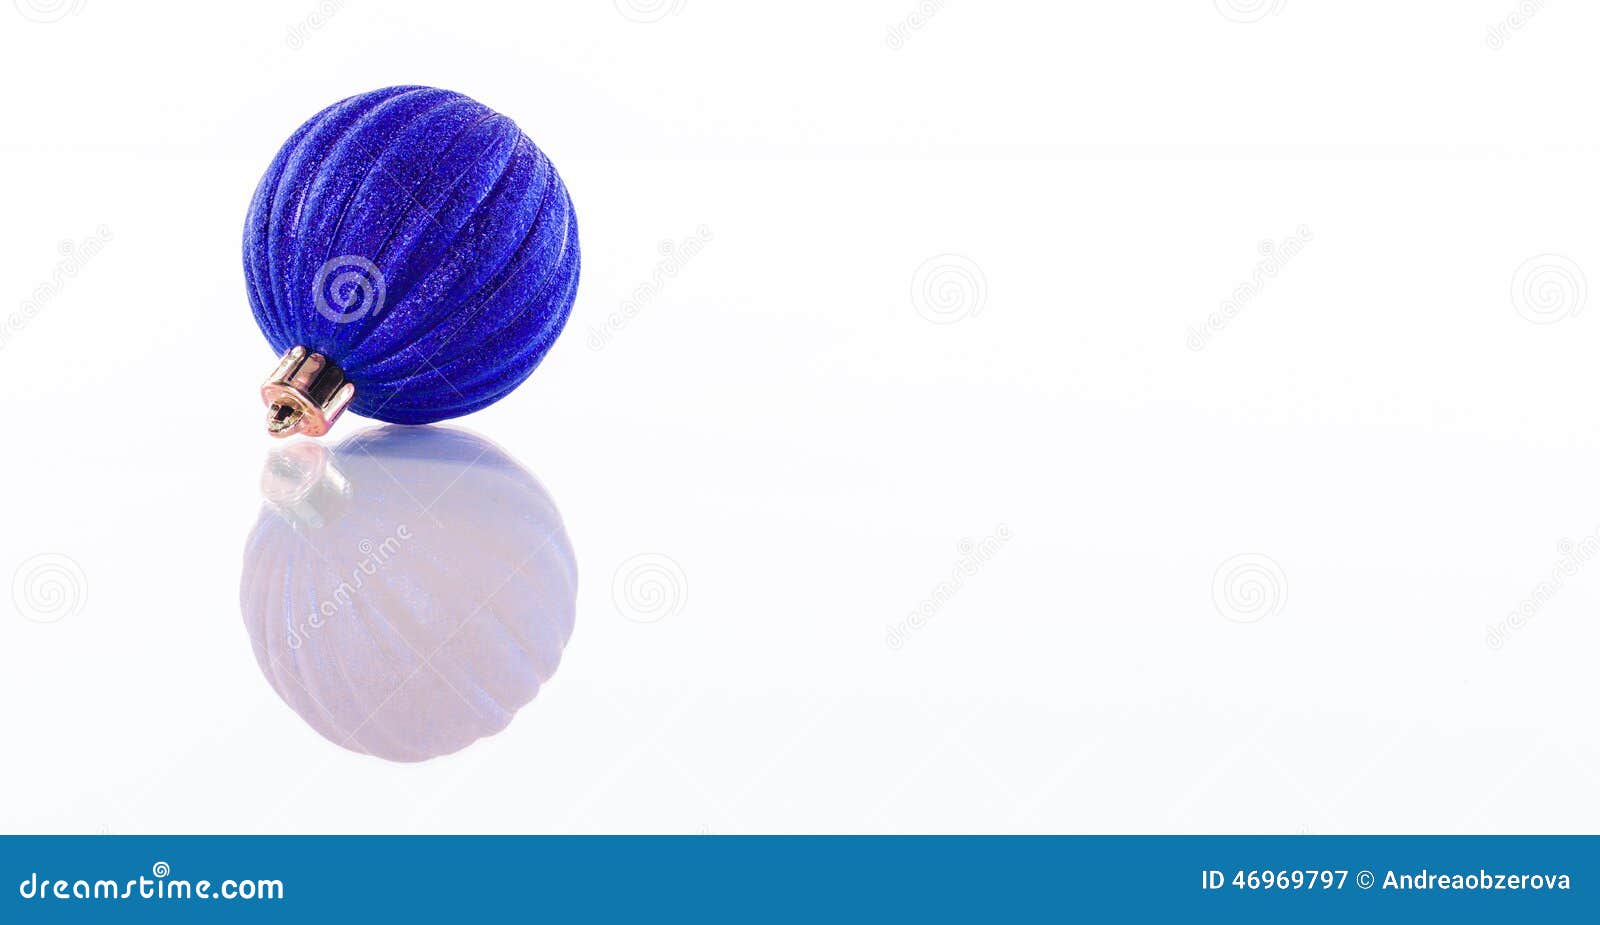 one blue christmas ball  on white reflective perspex background